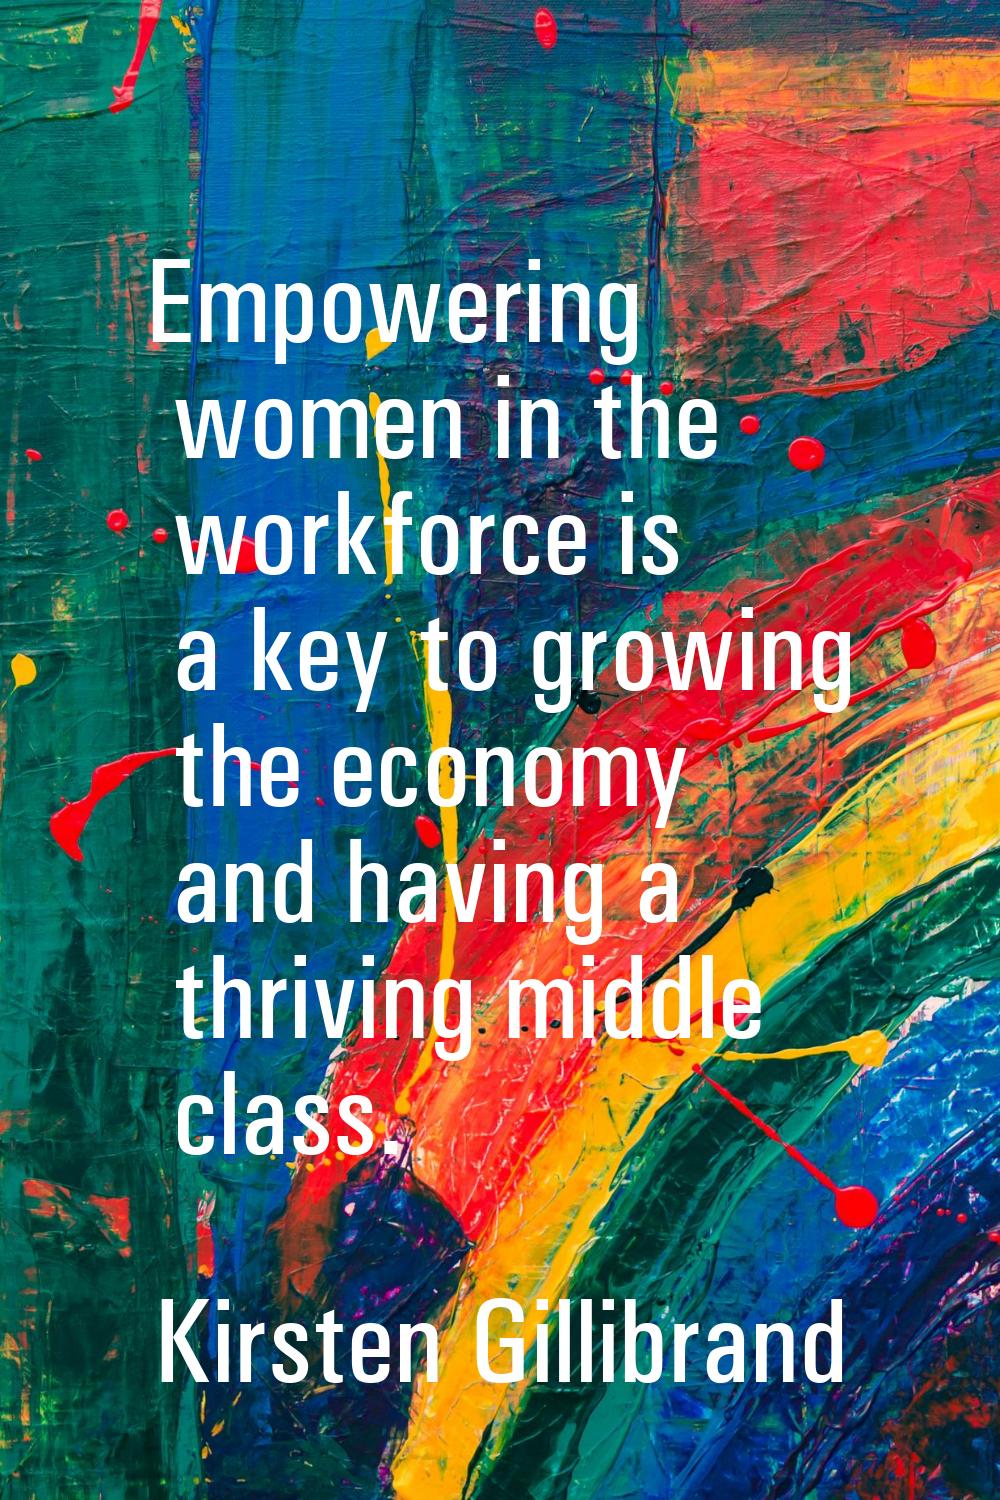 Empowering women in the workforce is a key to growing the economy and having a thriving middle clas